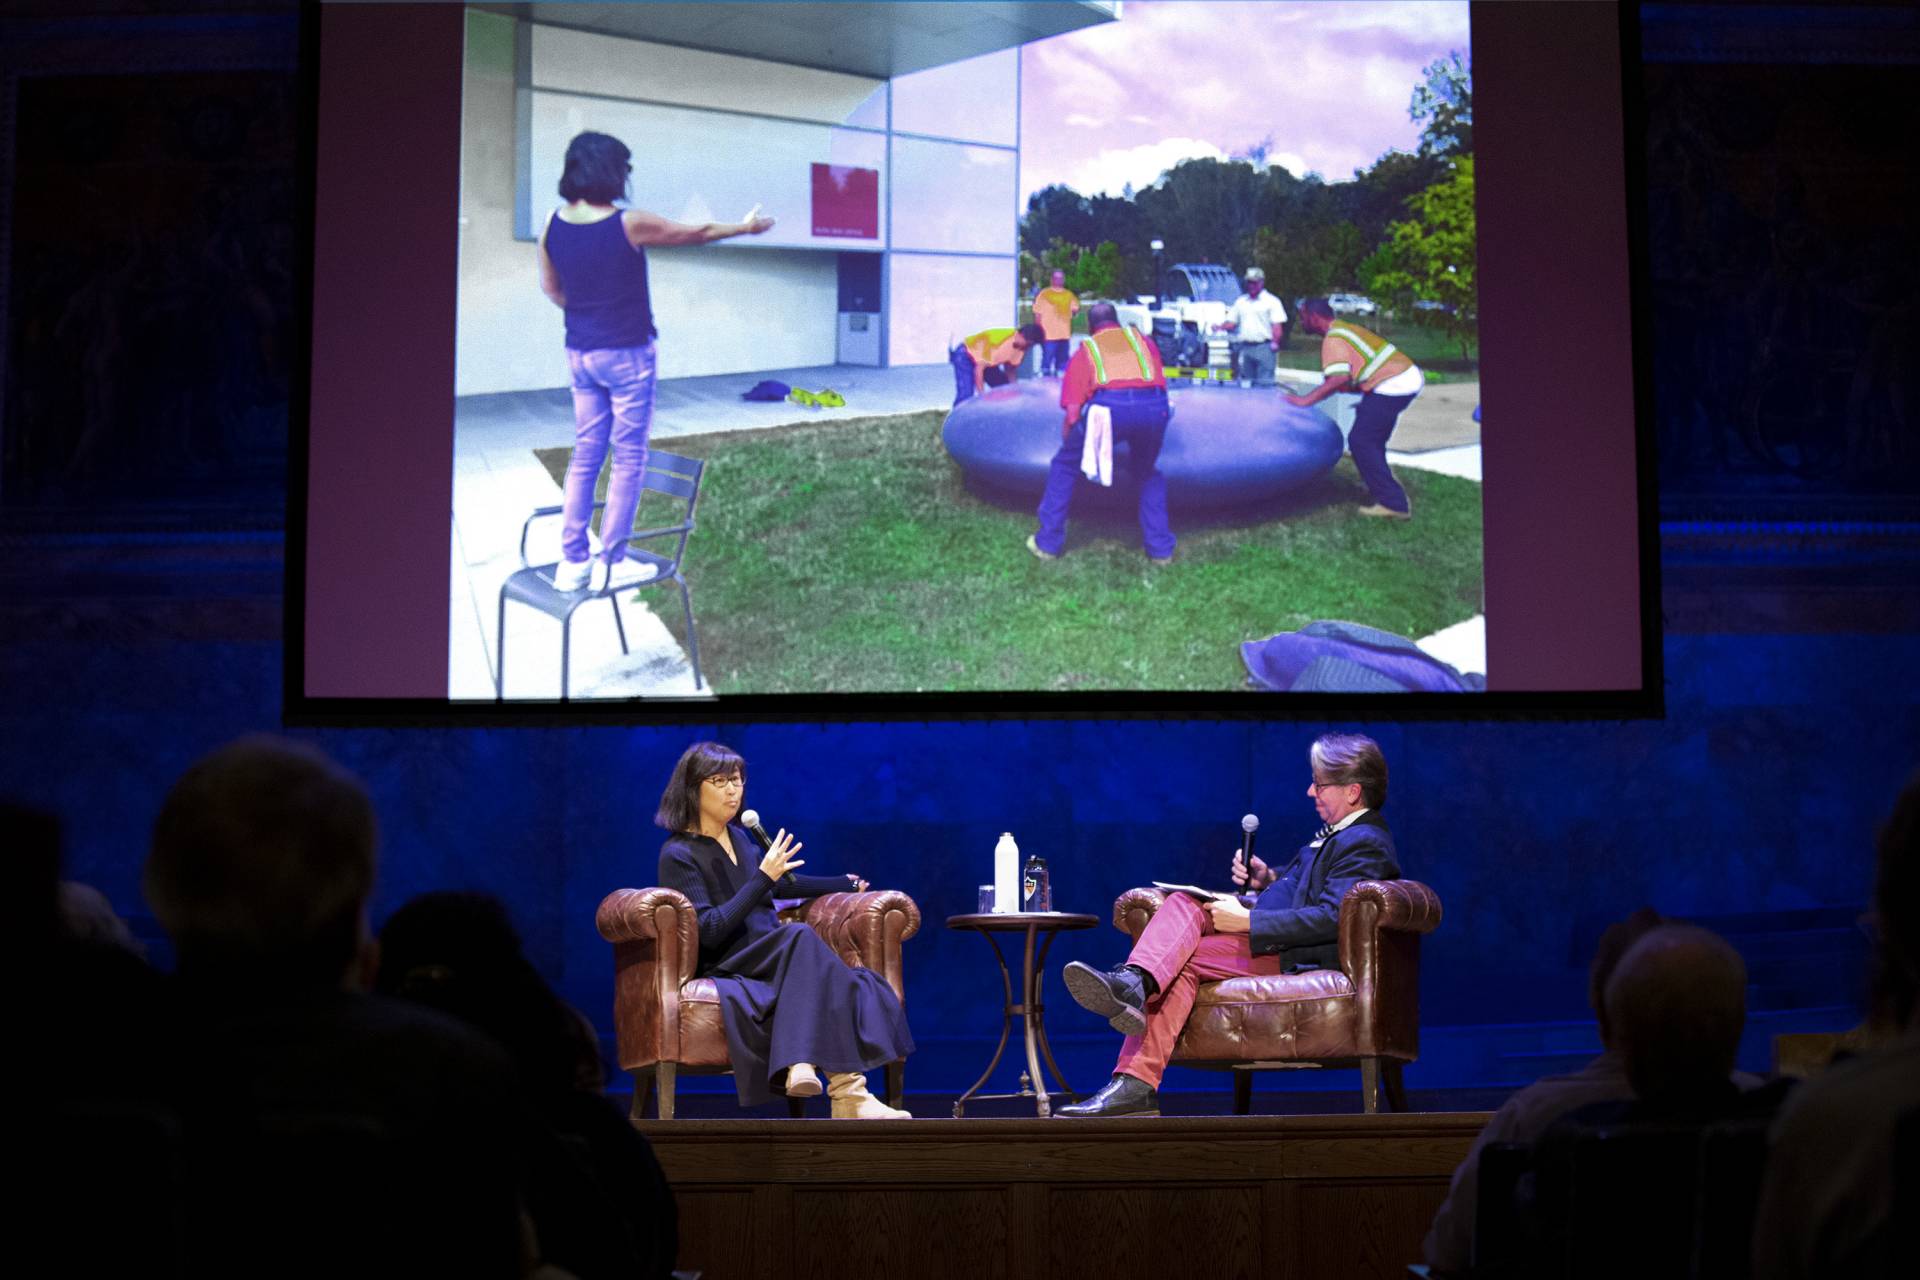 Maya Lin speaks with James Steward on stage about her installation and projects on a screen an image of her directing her colleagues positioning a large grey inner tube on a grassy square